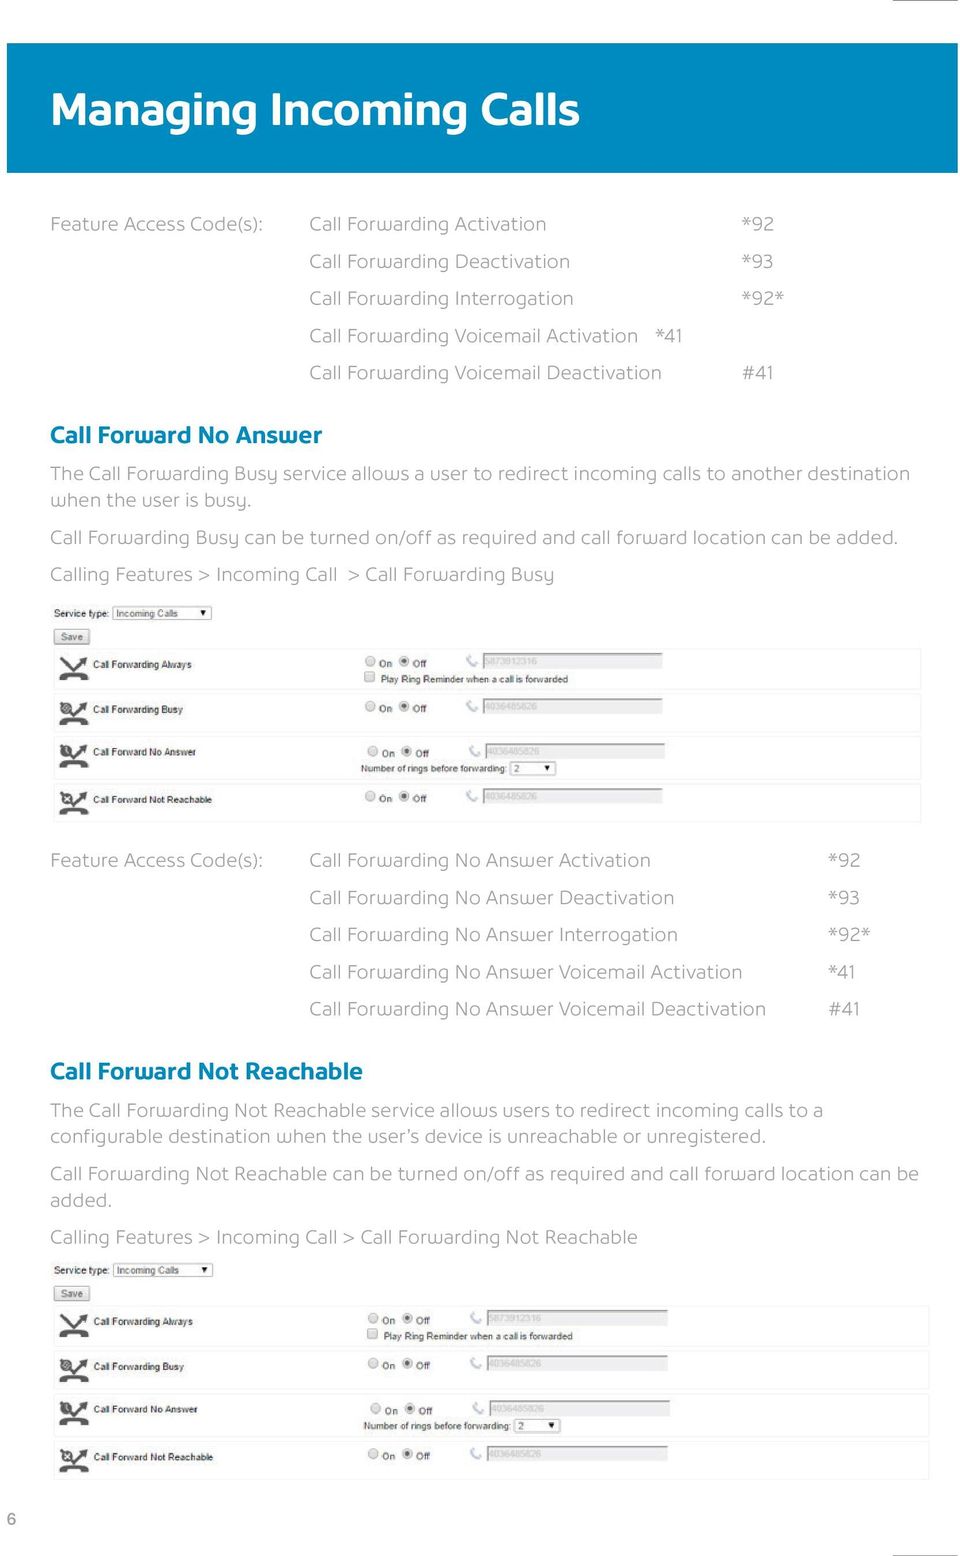 Call Forwarding Busy can be turned on/off as required and call forward location can be added.